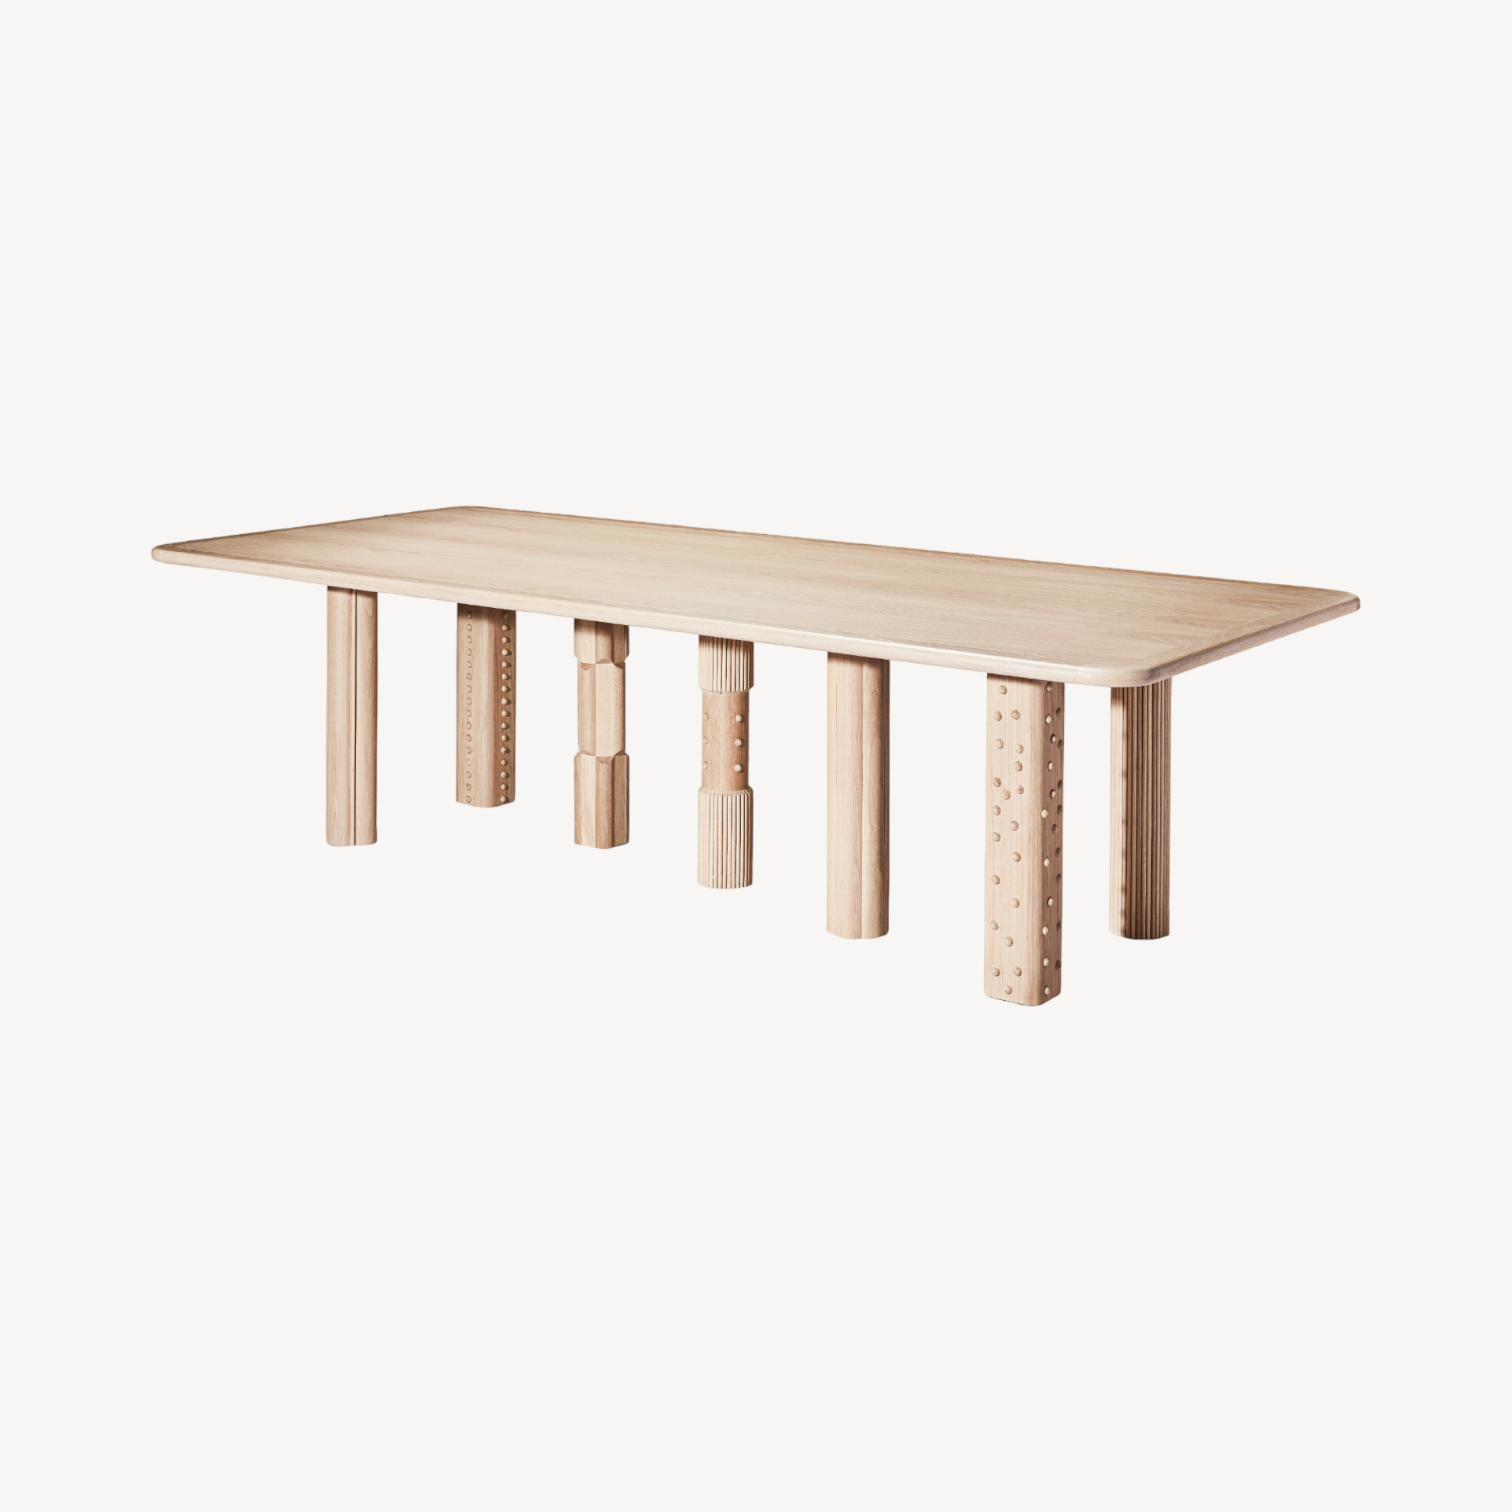 Adorn Maxima Dining Table - Zuster Furniture